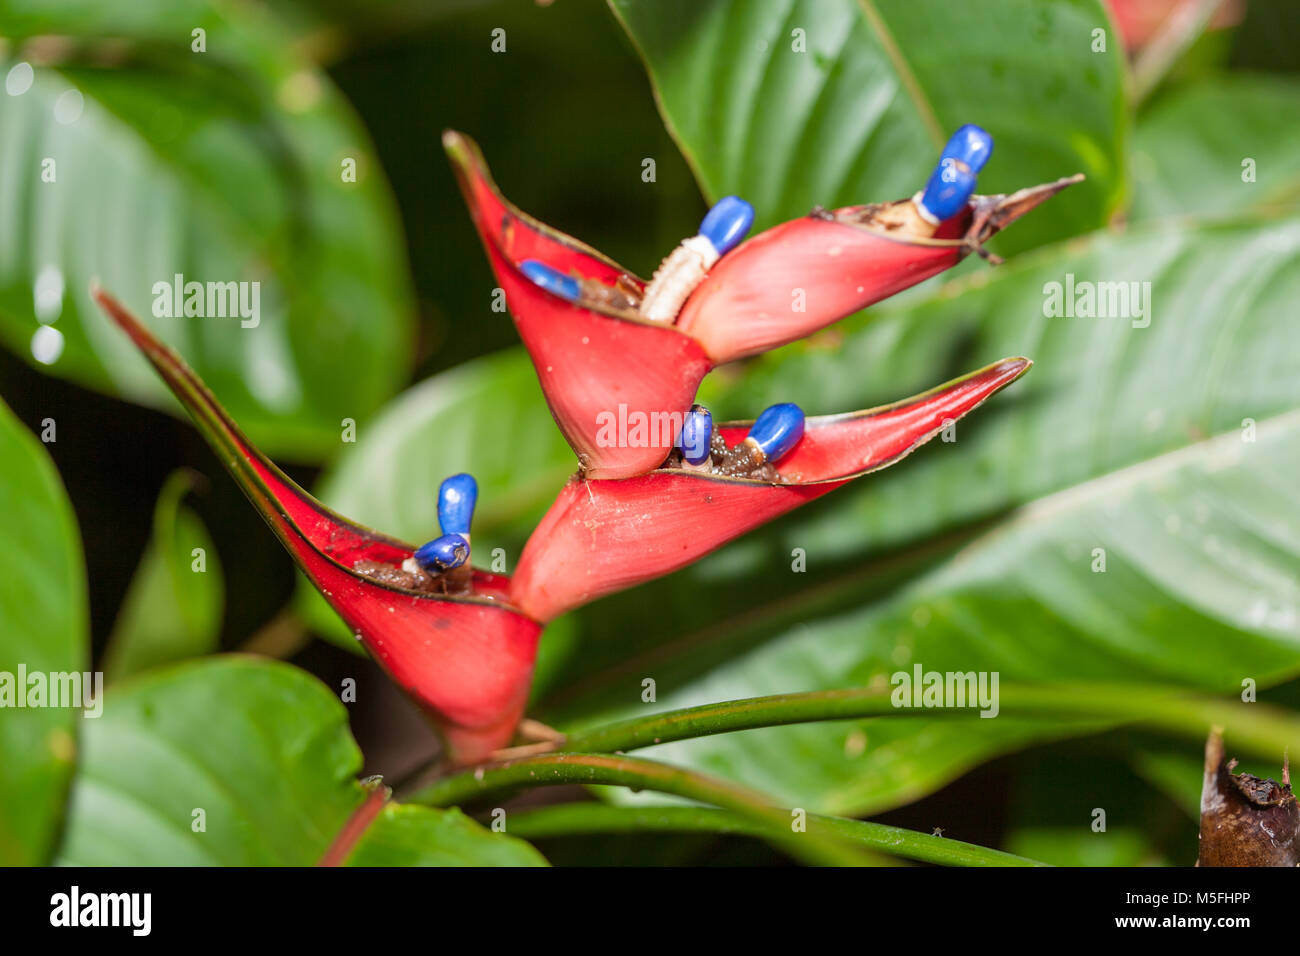 Lobster-claw, Wild Plantain (Heliconia stricta) Stock Photo